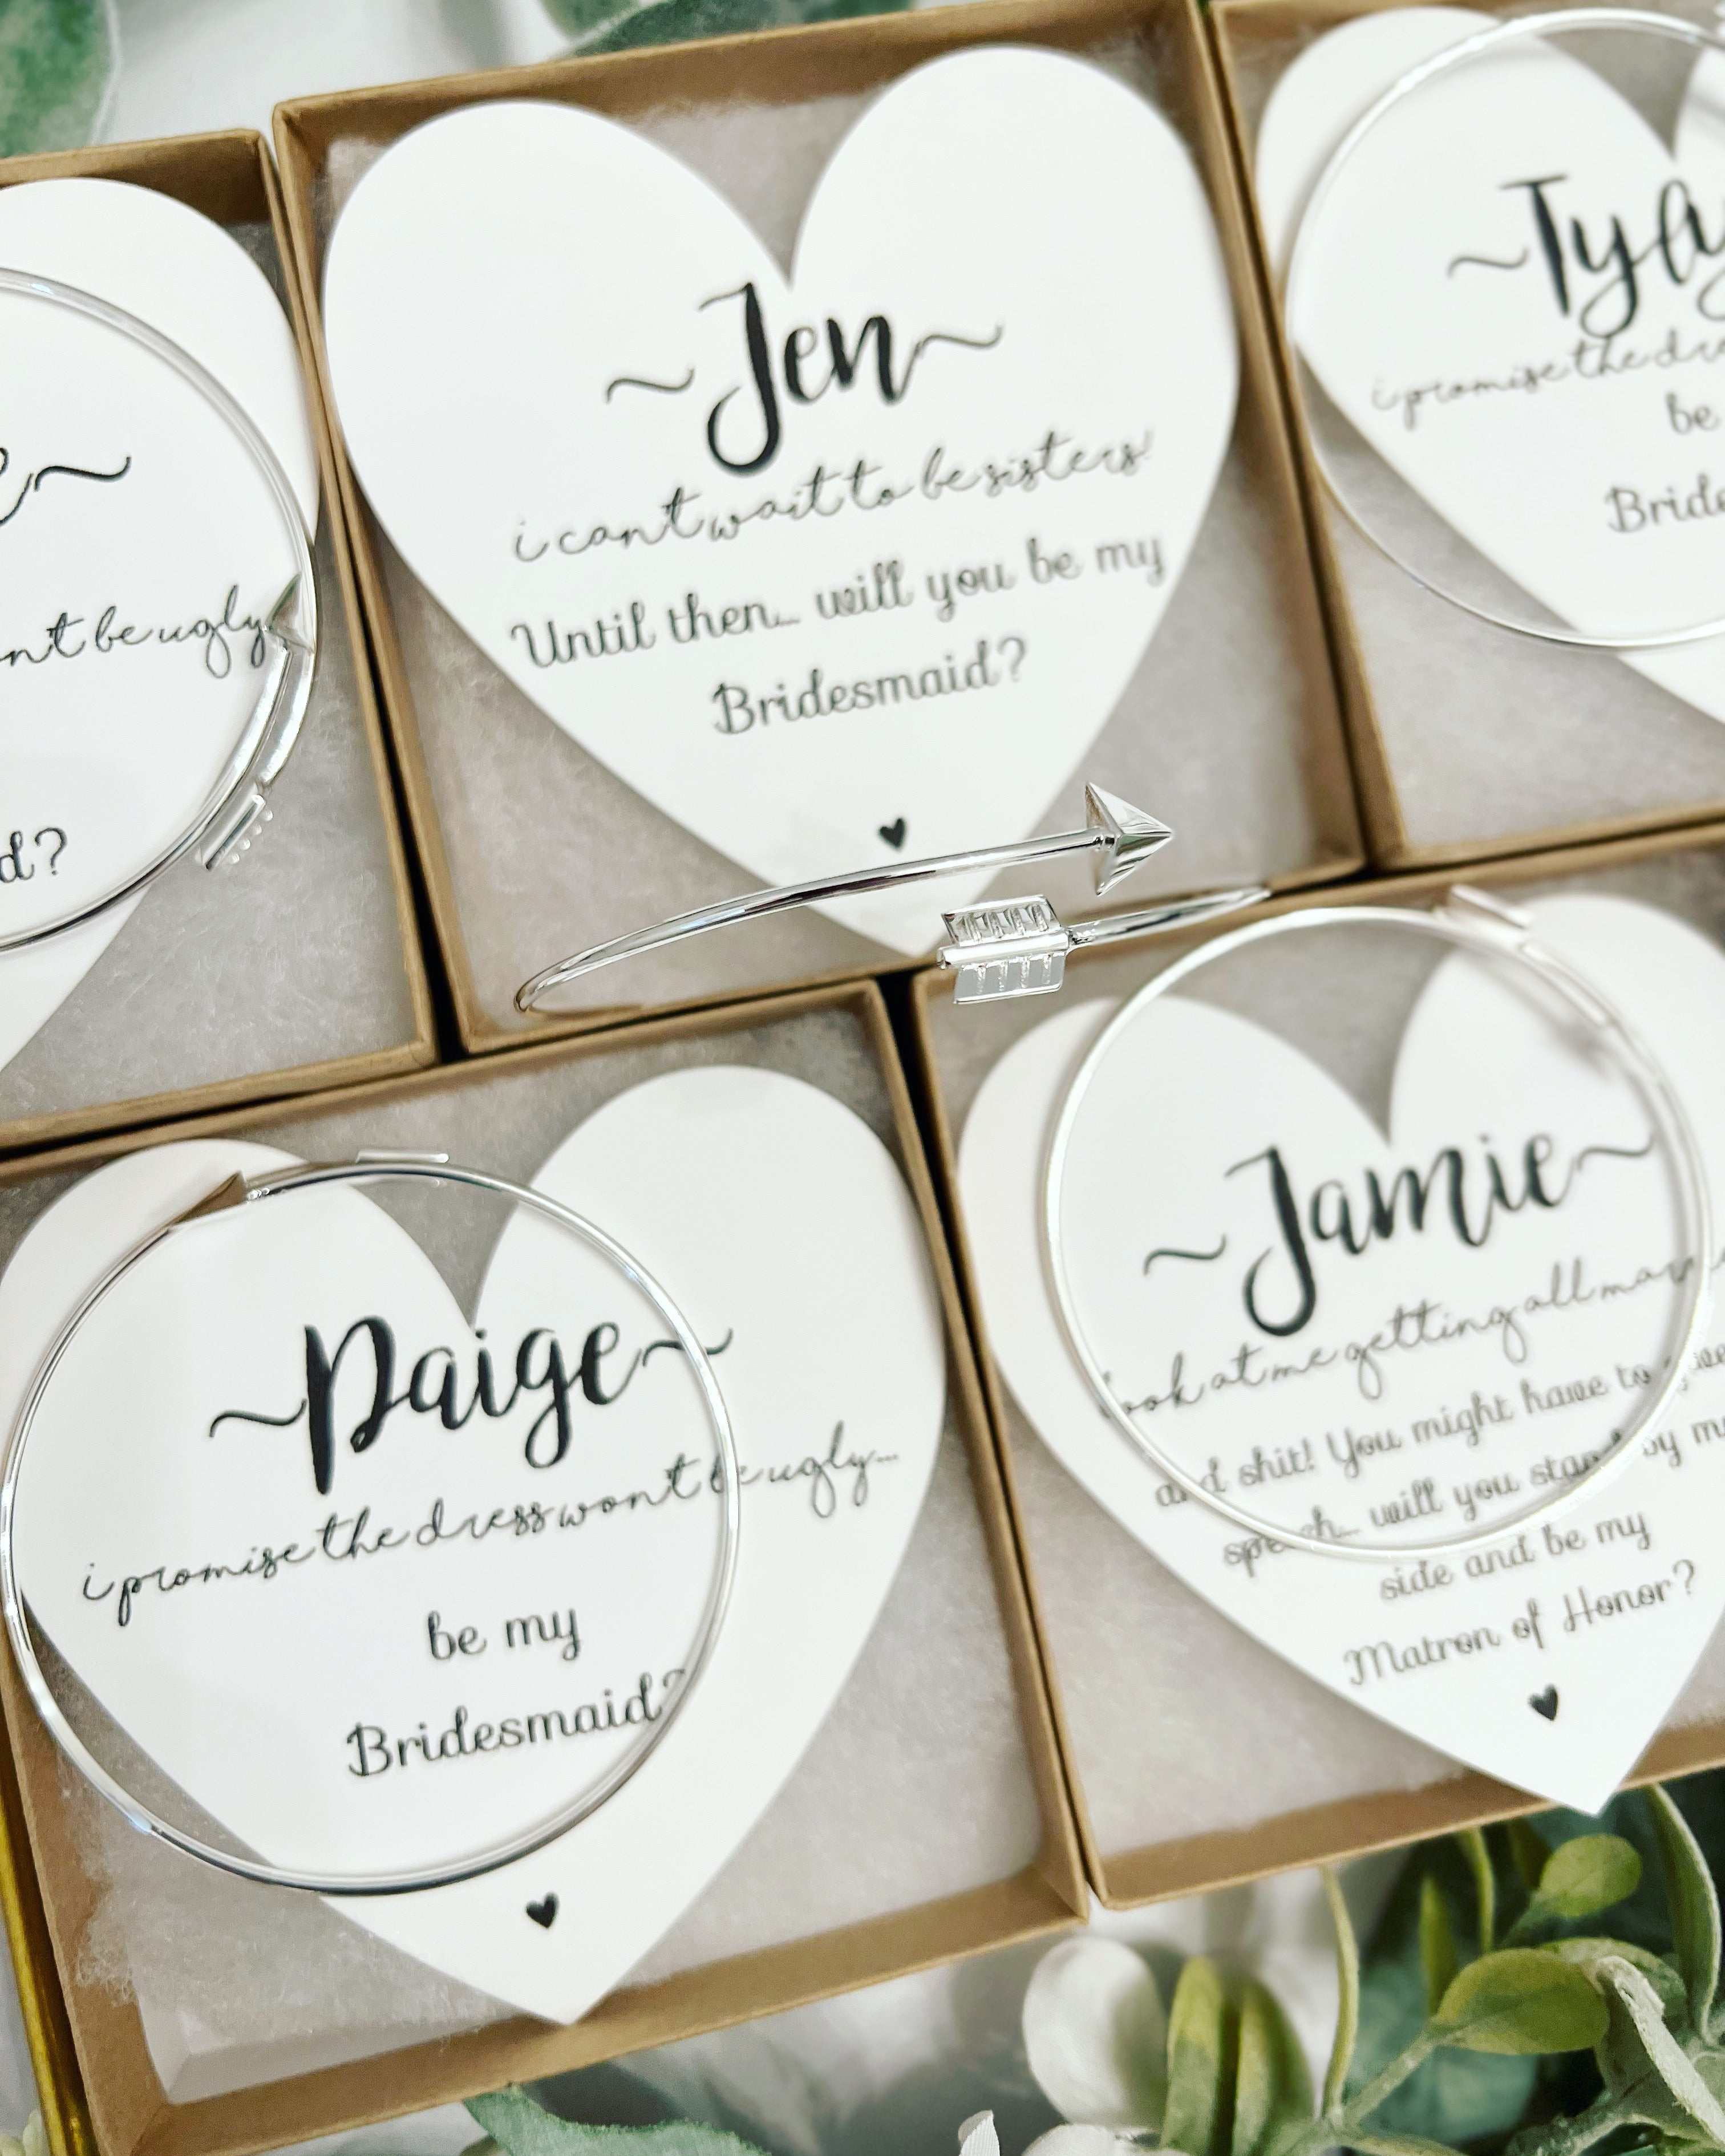 Buy Bridesmaid Proposal Wine Label Stickers - Set of 8 Be My Bridesmaid  Bridal Party Gifts | Includes 2 Maid of Honor + 6 Bridesmaids Wedding  Favors for Your Bride Tribe |